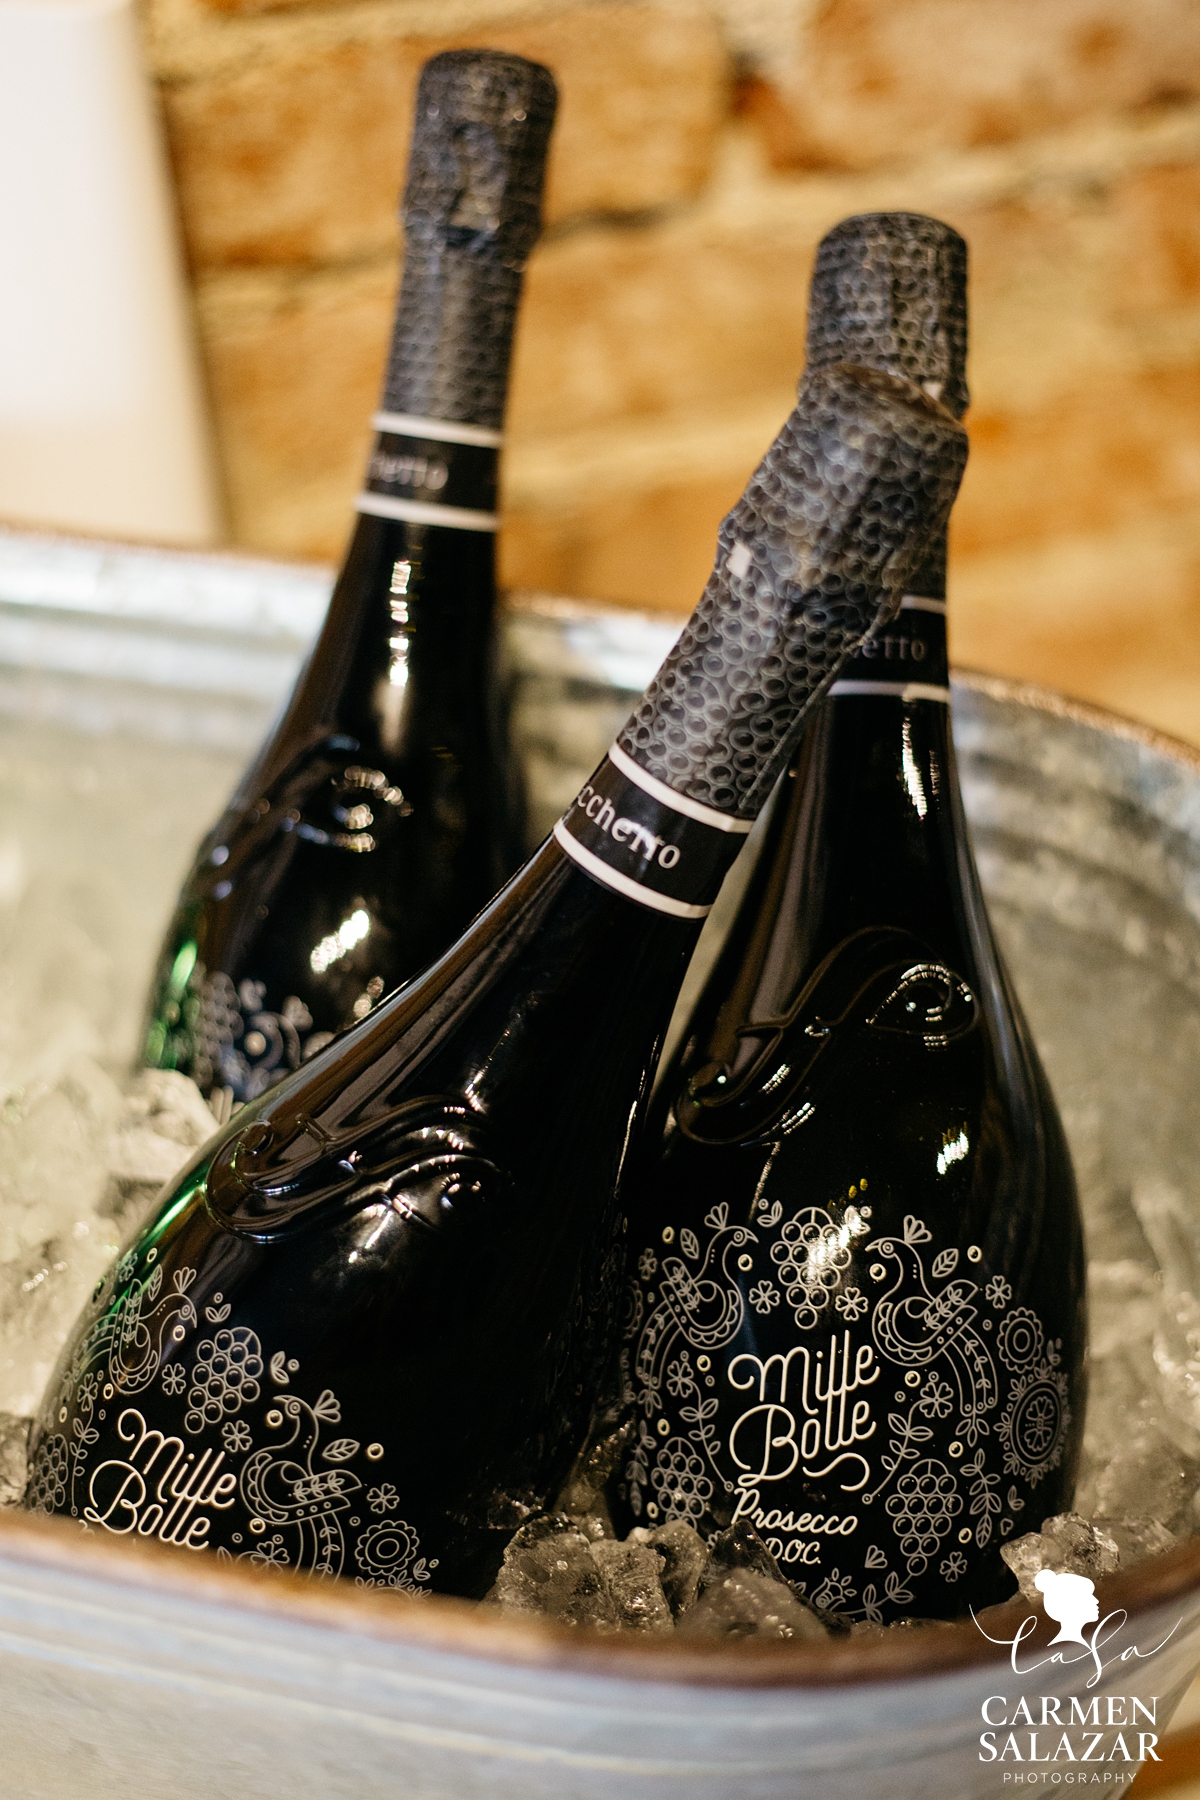 Champagne bottles at VIP party with Sacramento event photographer Carmen Salazar